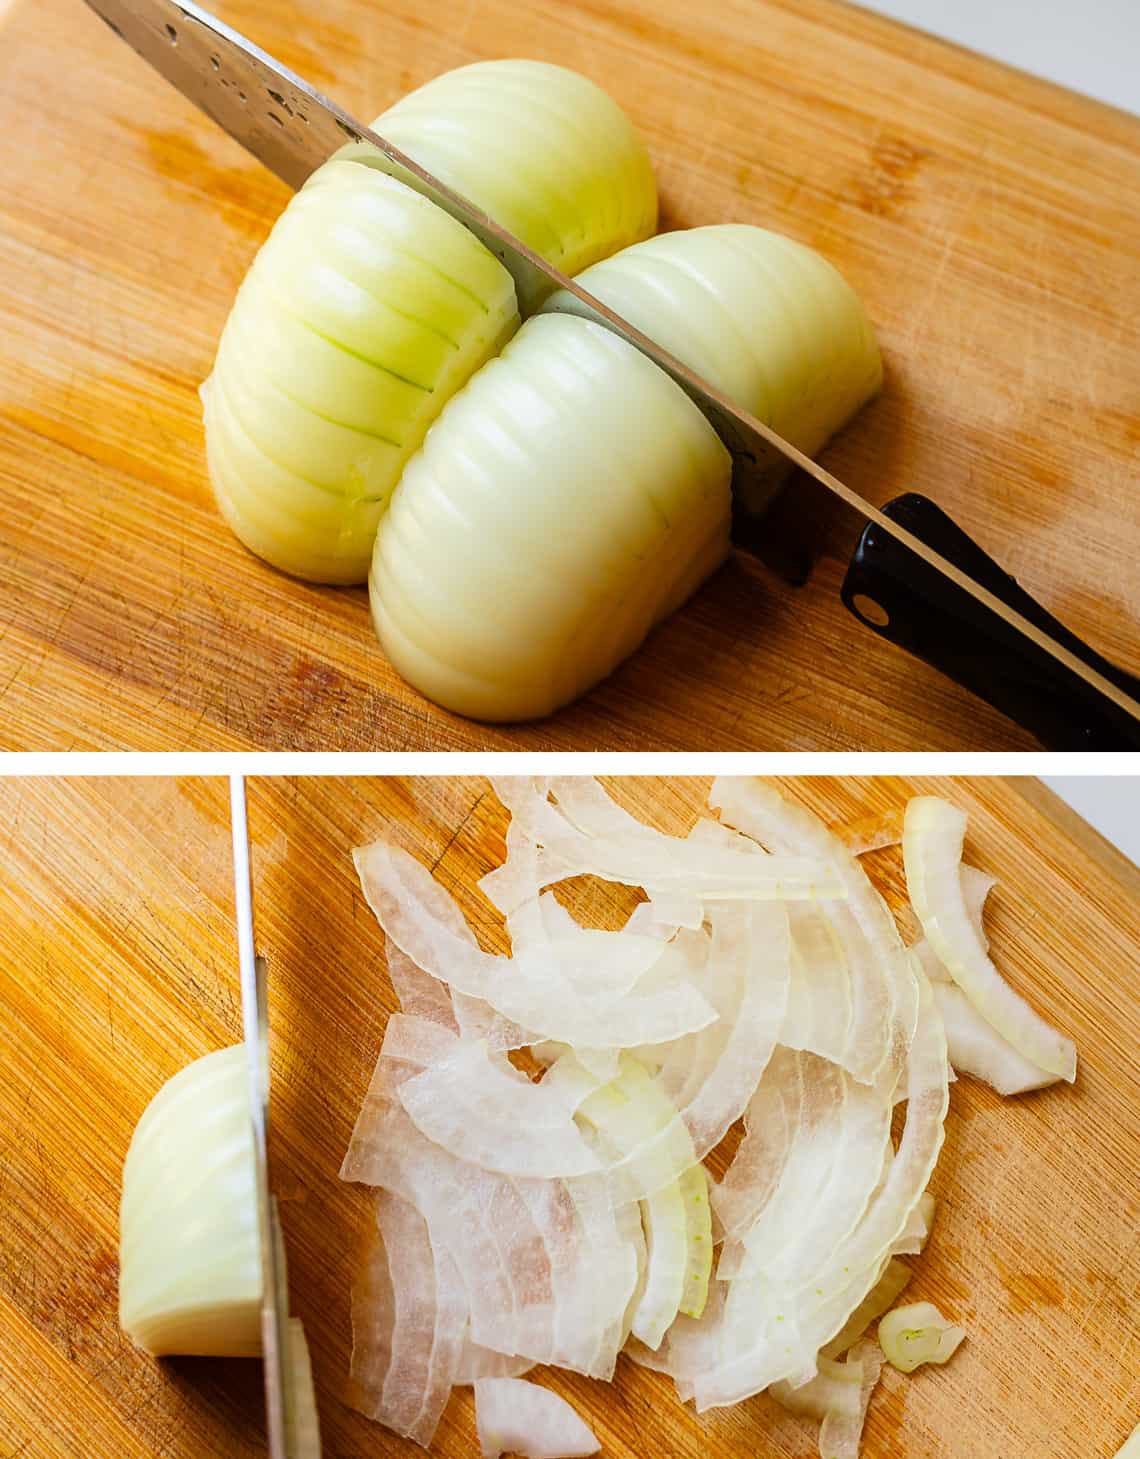 Slicing onions along its height and then width to get very thing cuts.